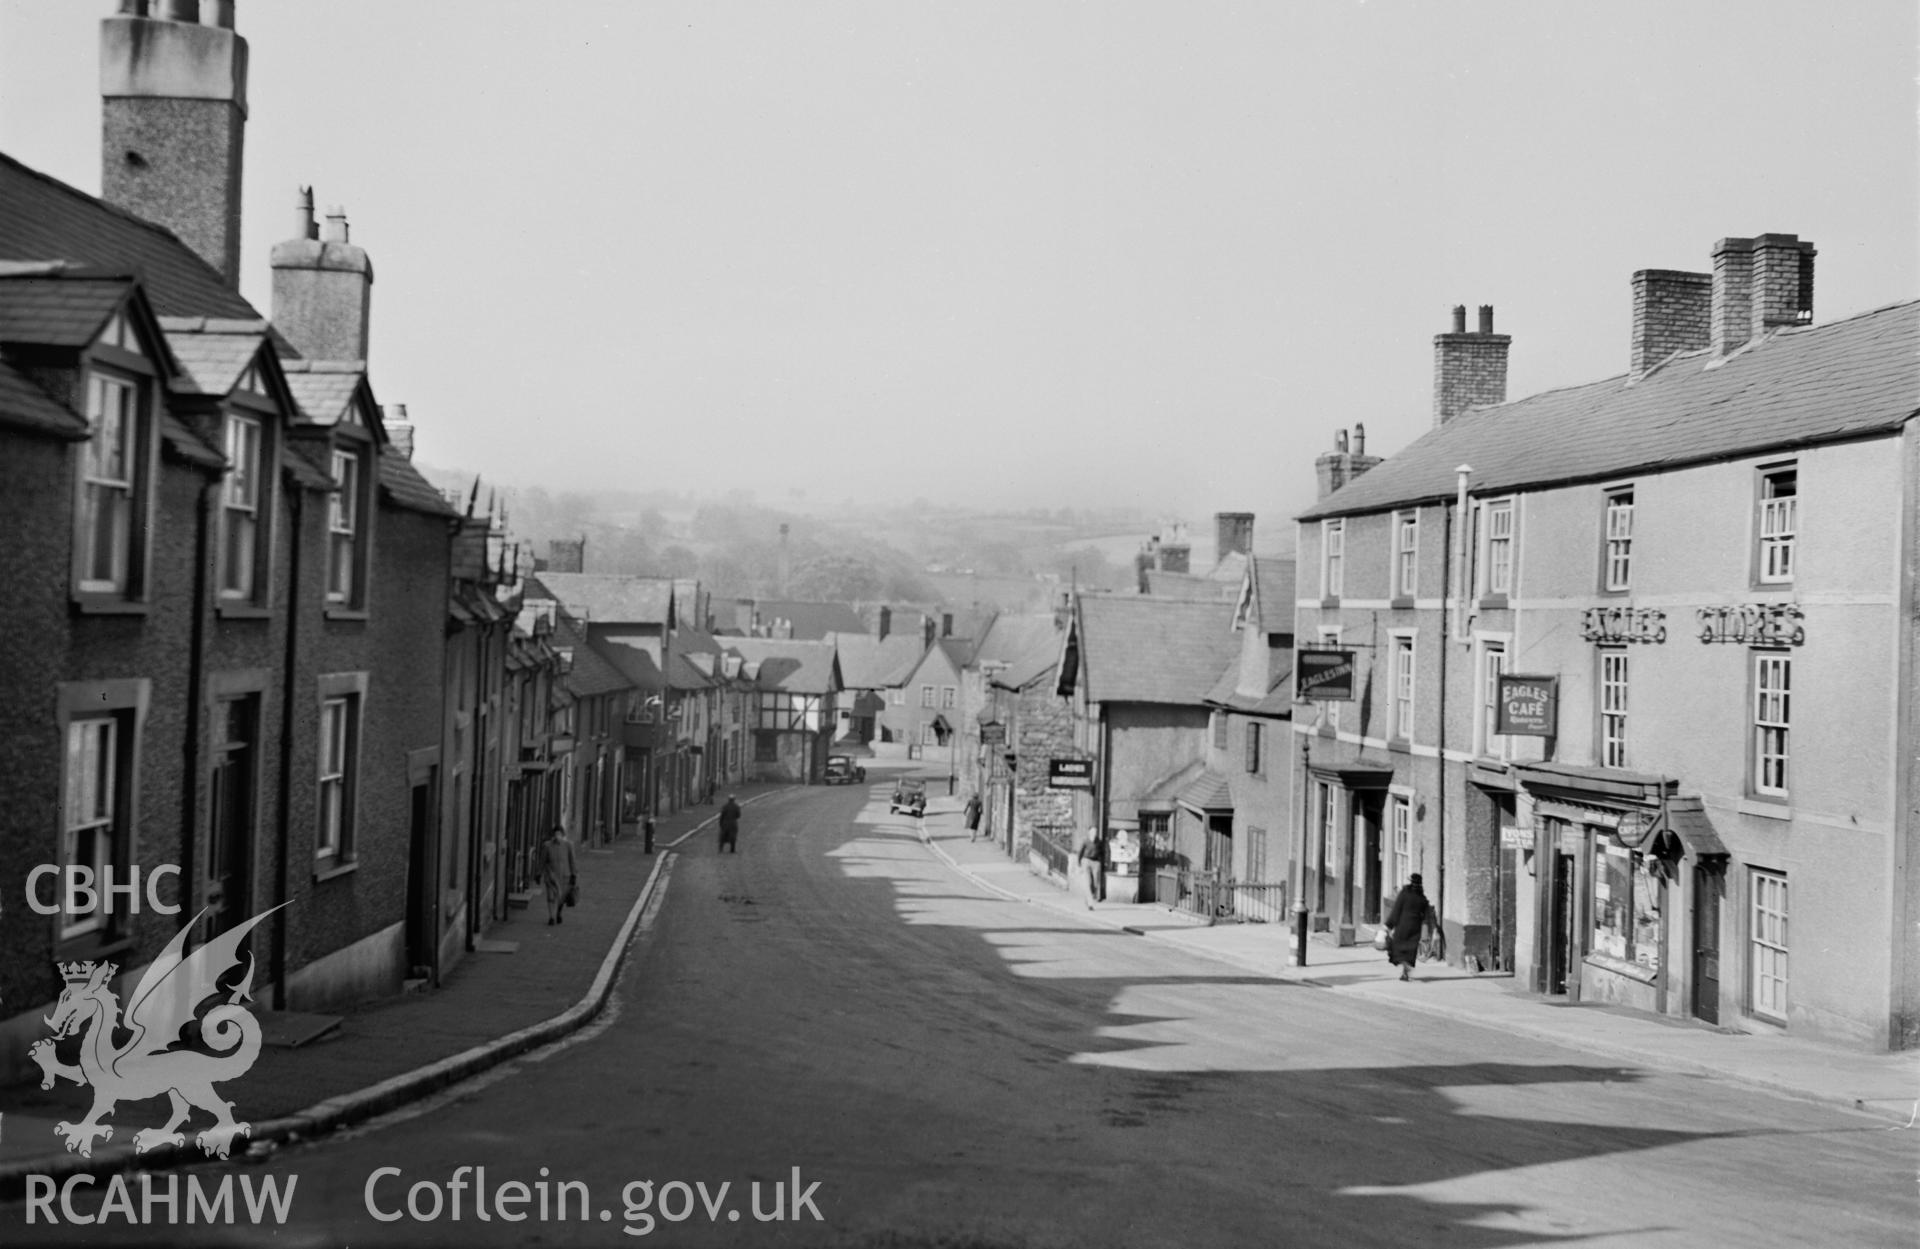 Black and white photograph of nos 18-22, Clwyd Street, Ruthin, including brief descriptive note.